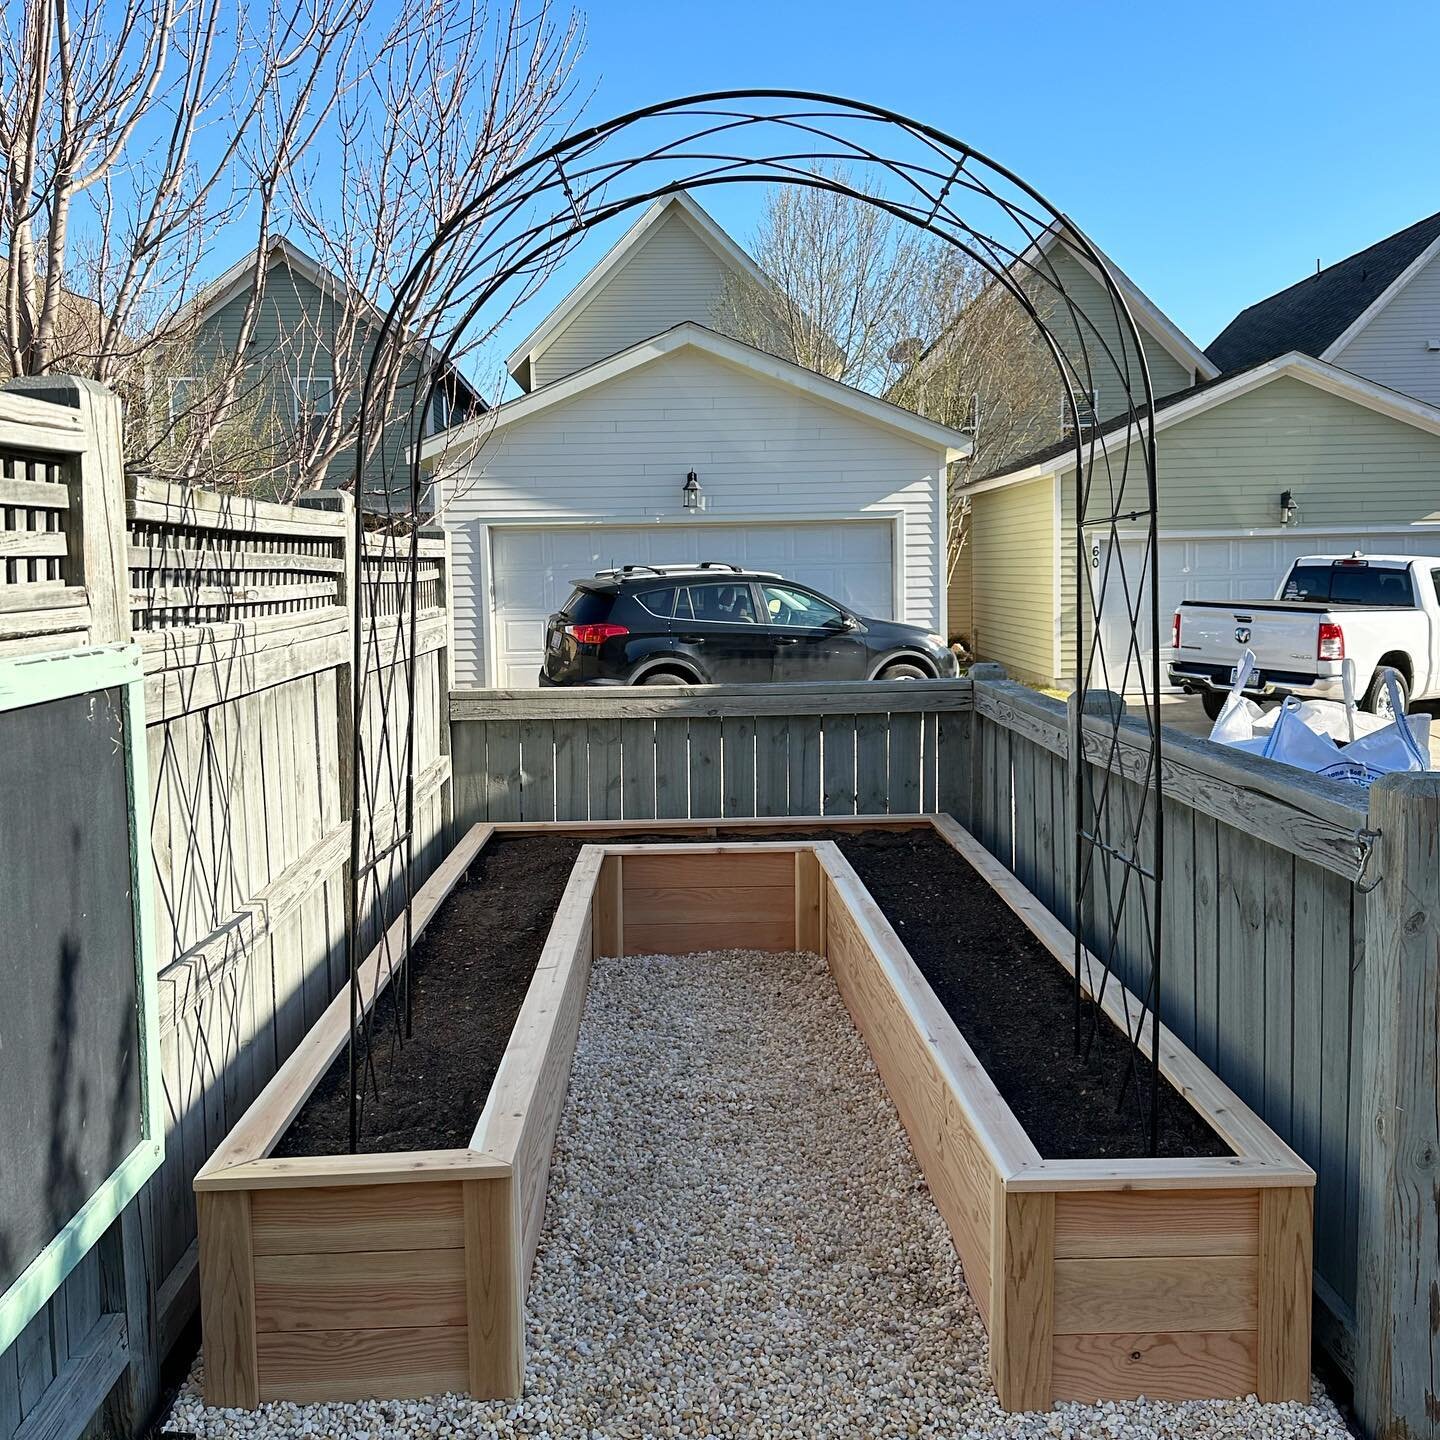 This is where I&rsquo;ve been the past few weeks! My most ambitious client garden install: a custom cedar raised bed kitchen garden that in a few weeks will get filled with veggies, herbs, and flowers. These sweet clients told me their 6-year old dau